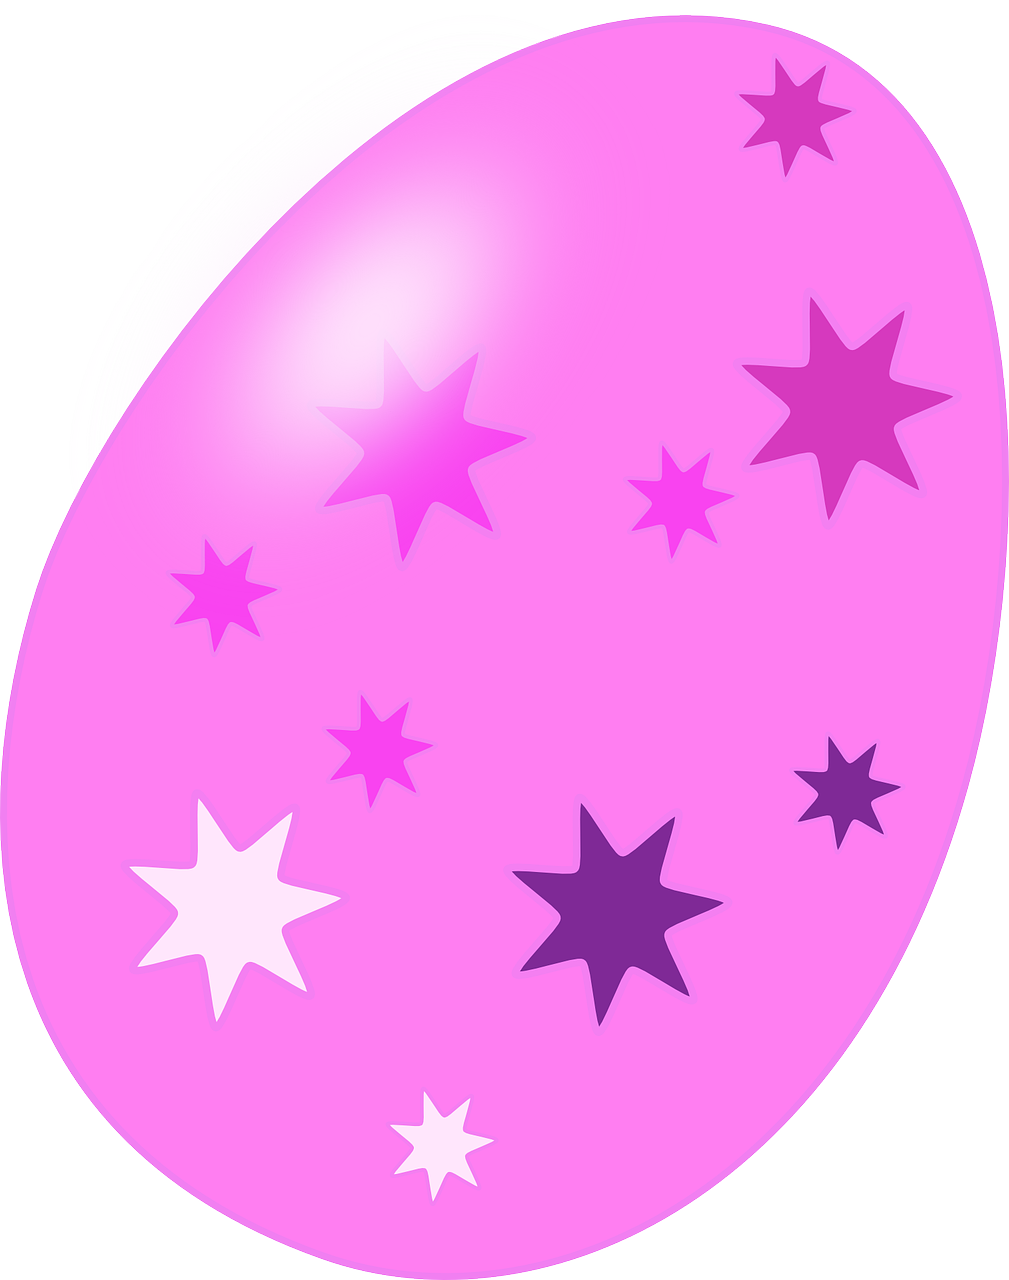 pink,egg,easter,celebration,decoration,free vector graphics,free pictures, free photos, free images, royalty free, free illustrations, public domain